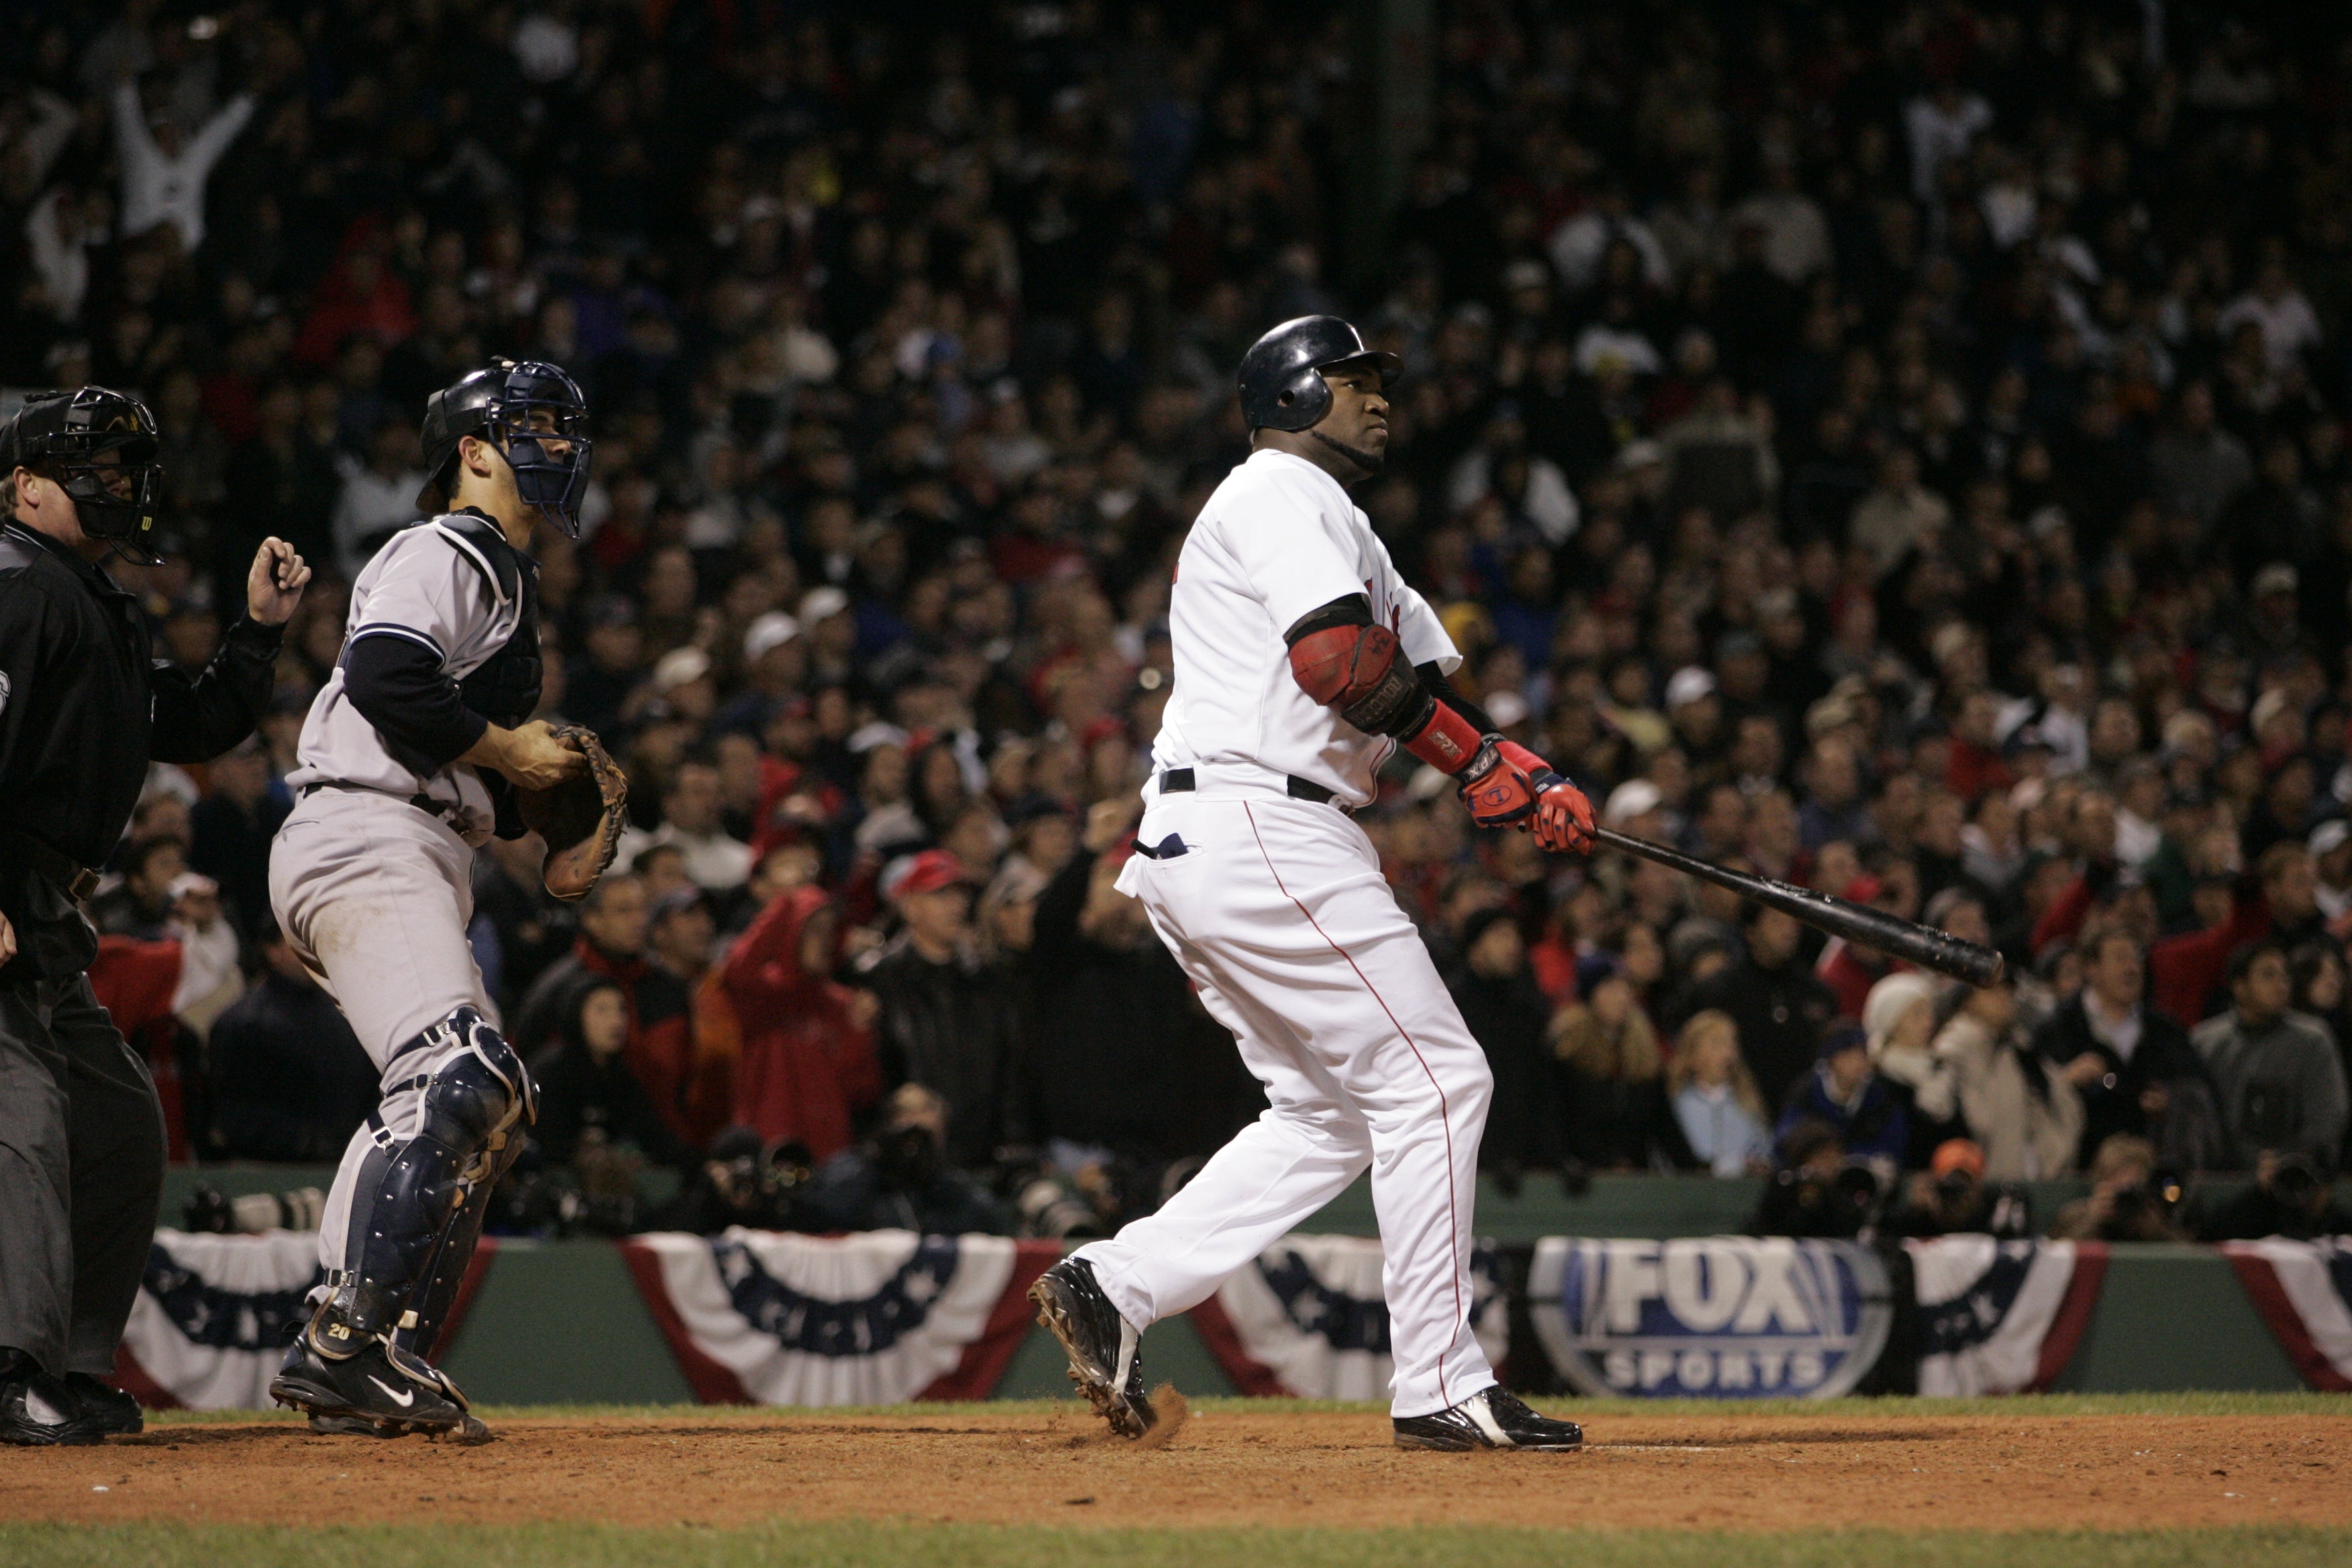 In the 2004 postseason, David Ortiz's heroics in the clutch ended Boston's championship drought and set the stage for a Hall of Fame career.